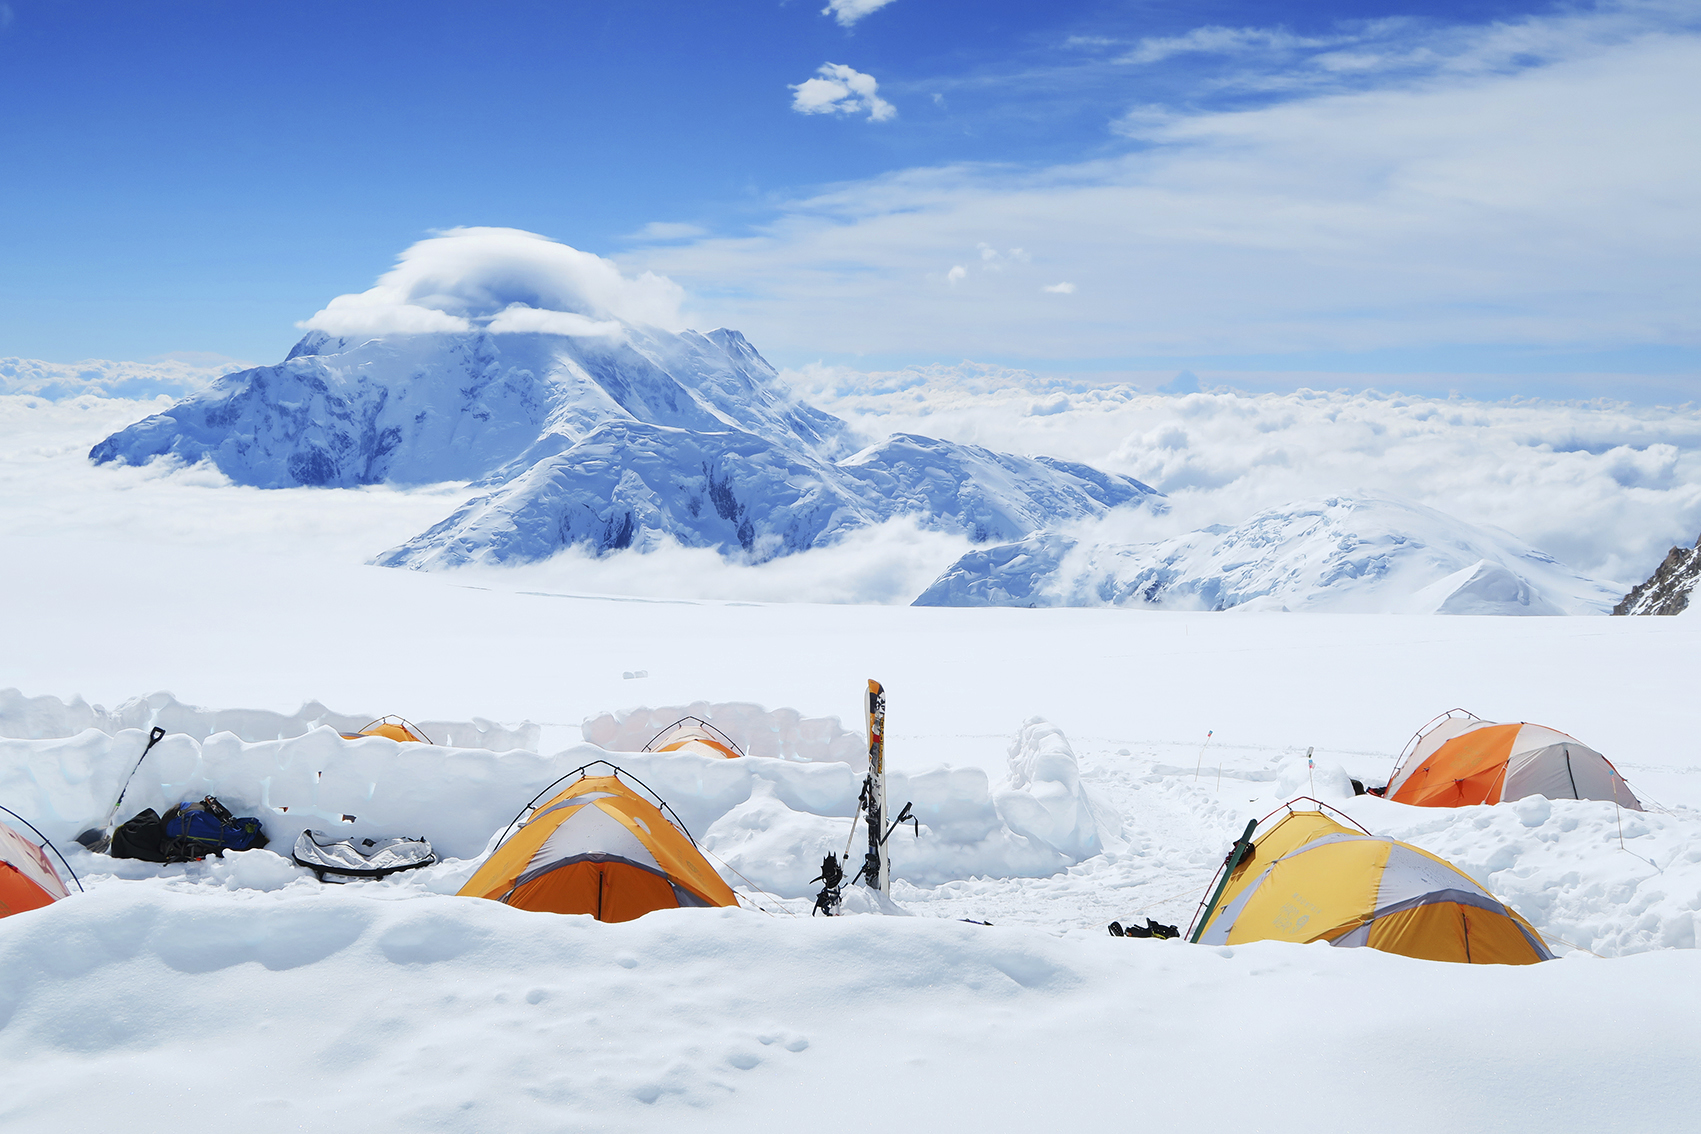 View of tents at 14,200ft camp